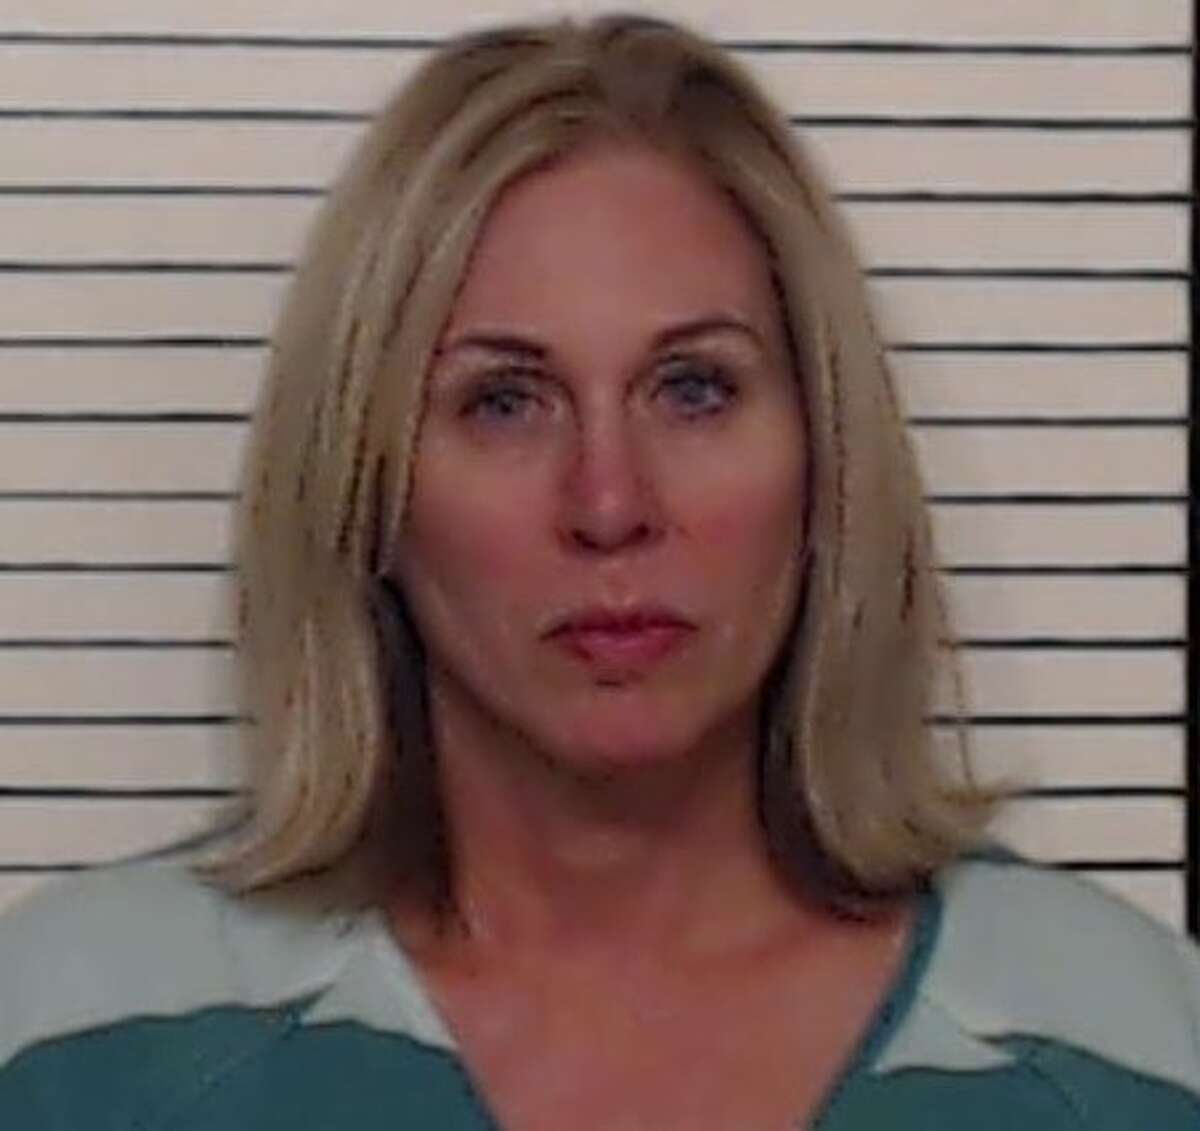 Dena Welch, 50, was charged with driving while intoxicated after police said she crashed into two New Braunfels Police vehicles on Tuesday morning.